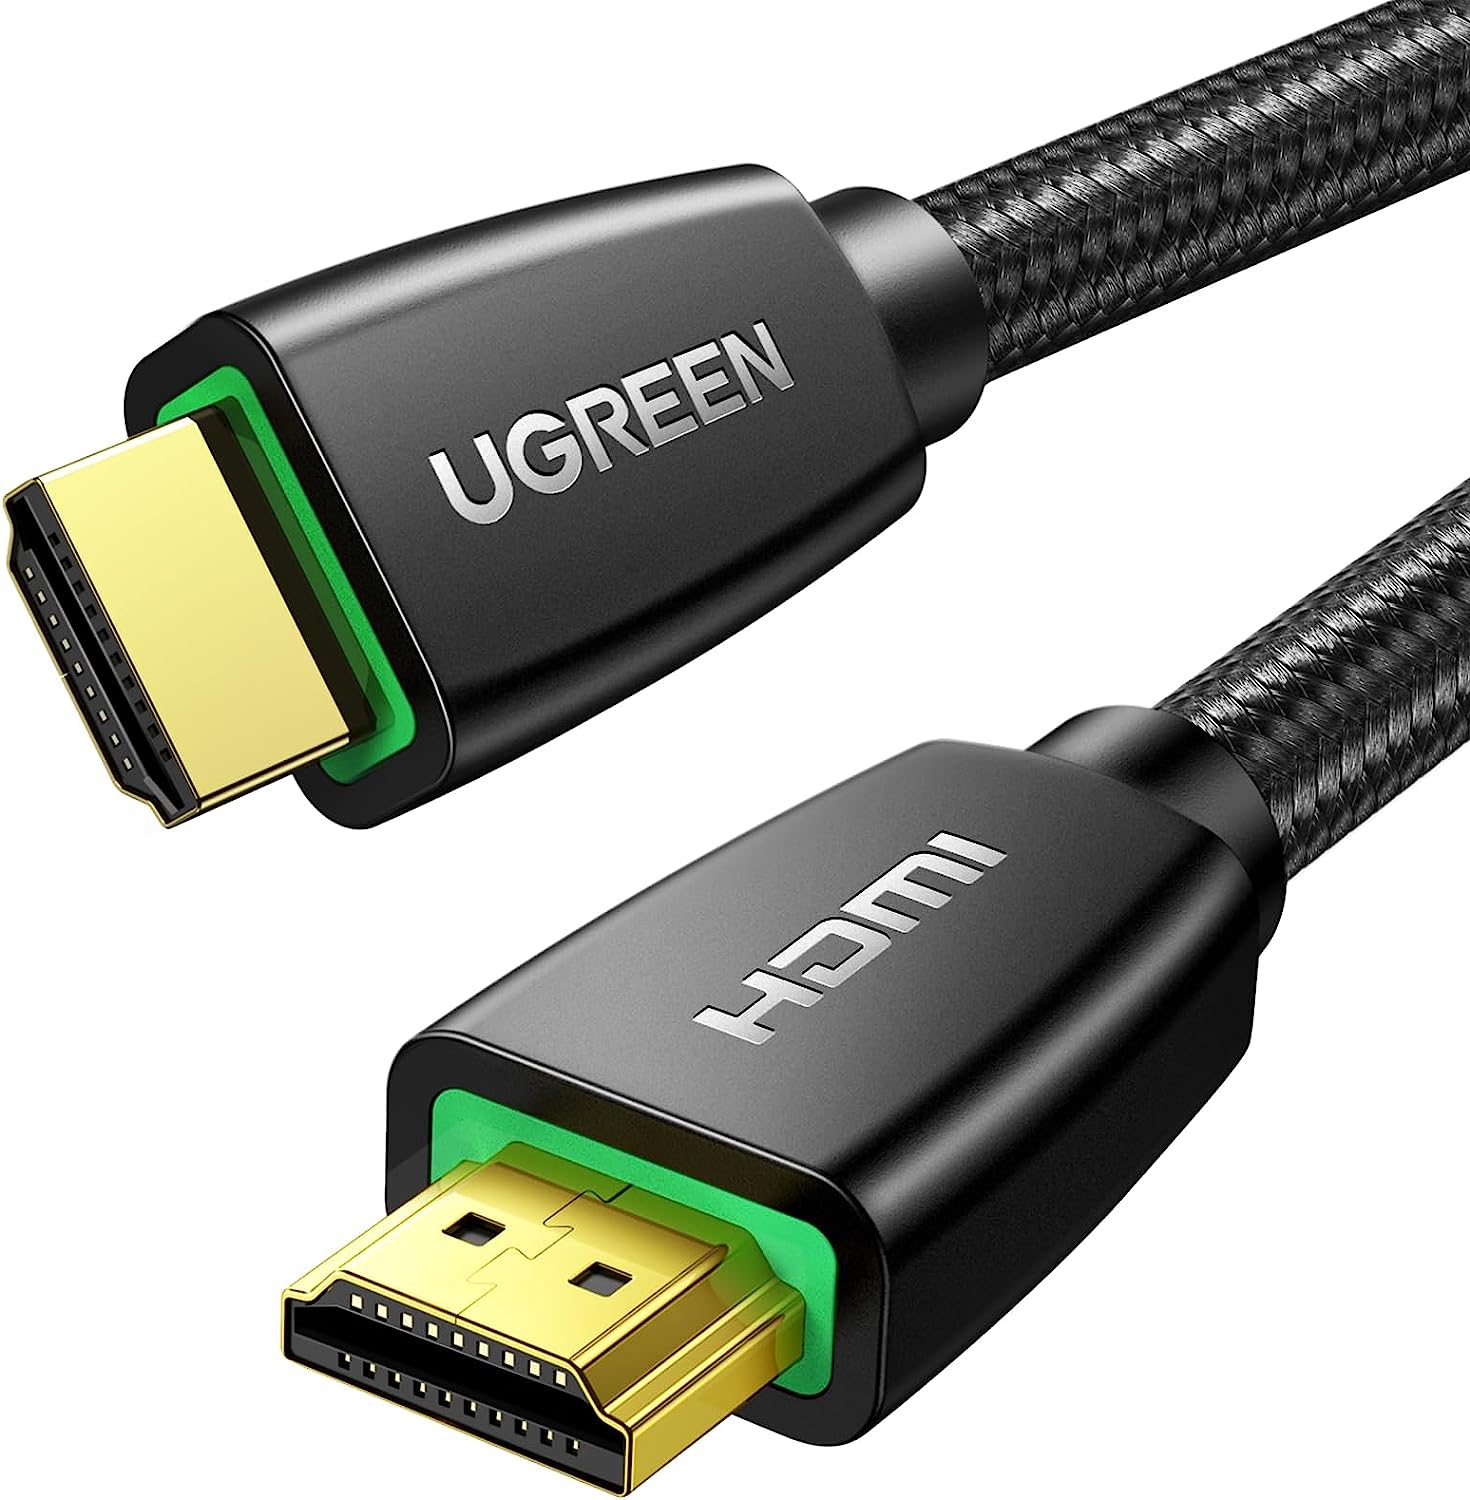 UGREEN 4K HDMI Cable 6.6FT,18Gbps High Speed Braided [...]